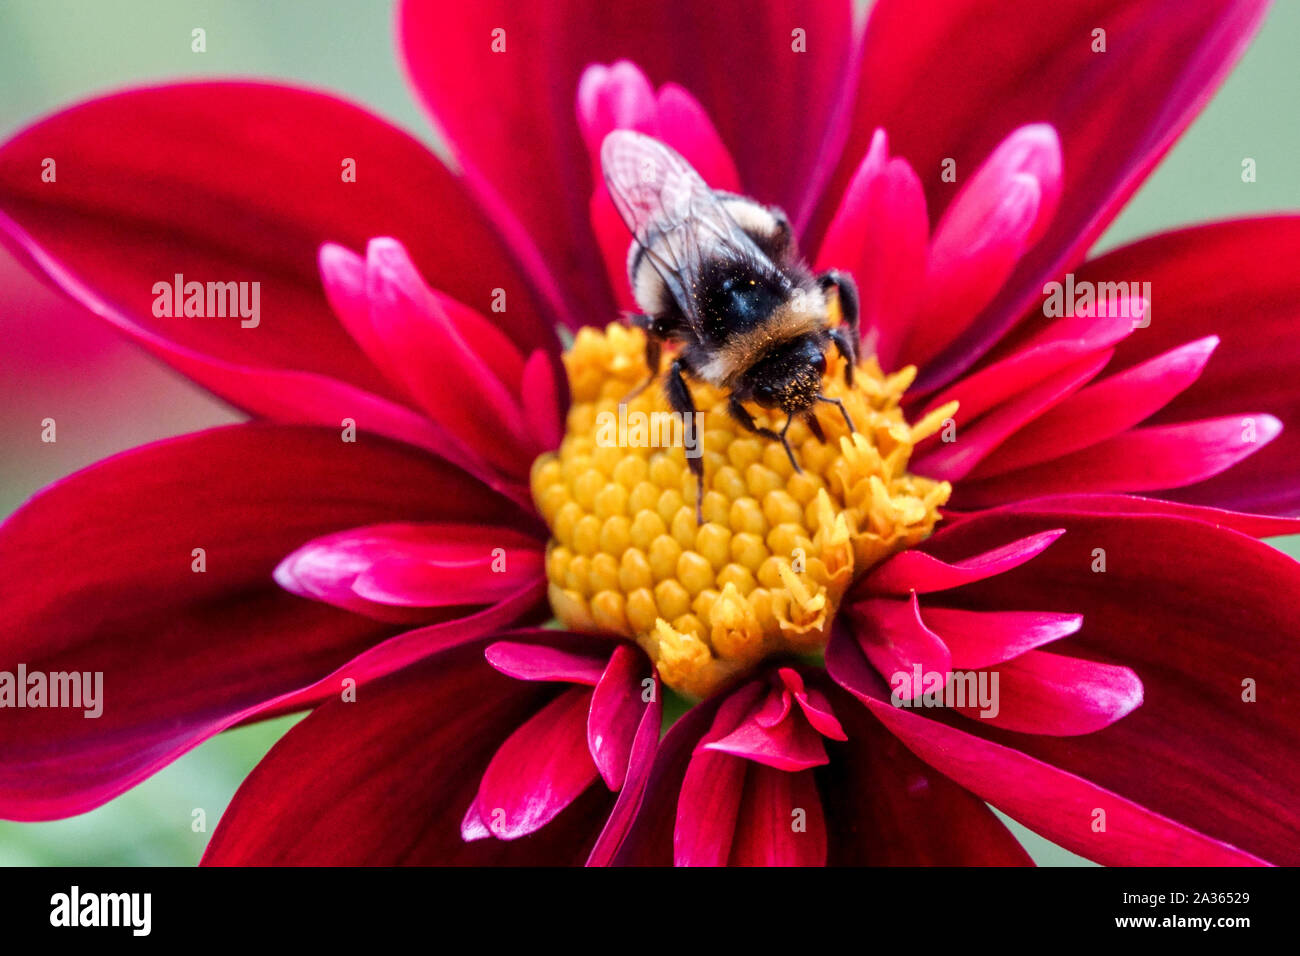 Red Dahlia 'Don Hill', Dahlia bumblebee on single flower close up, bumblebee collecting nectar, feeding Stock Photo